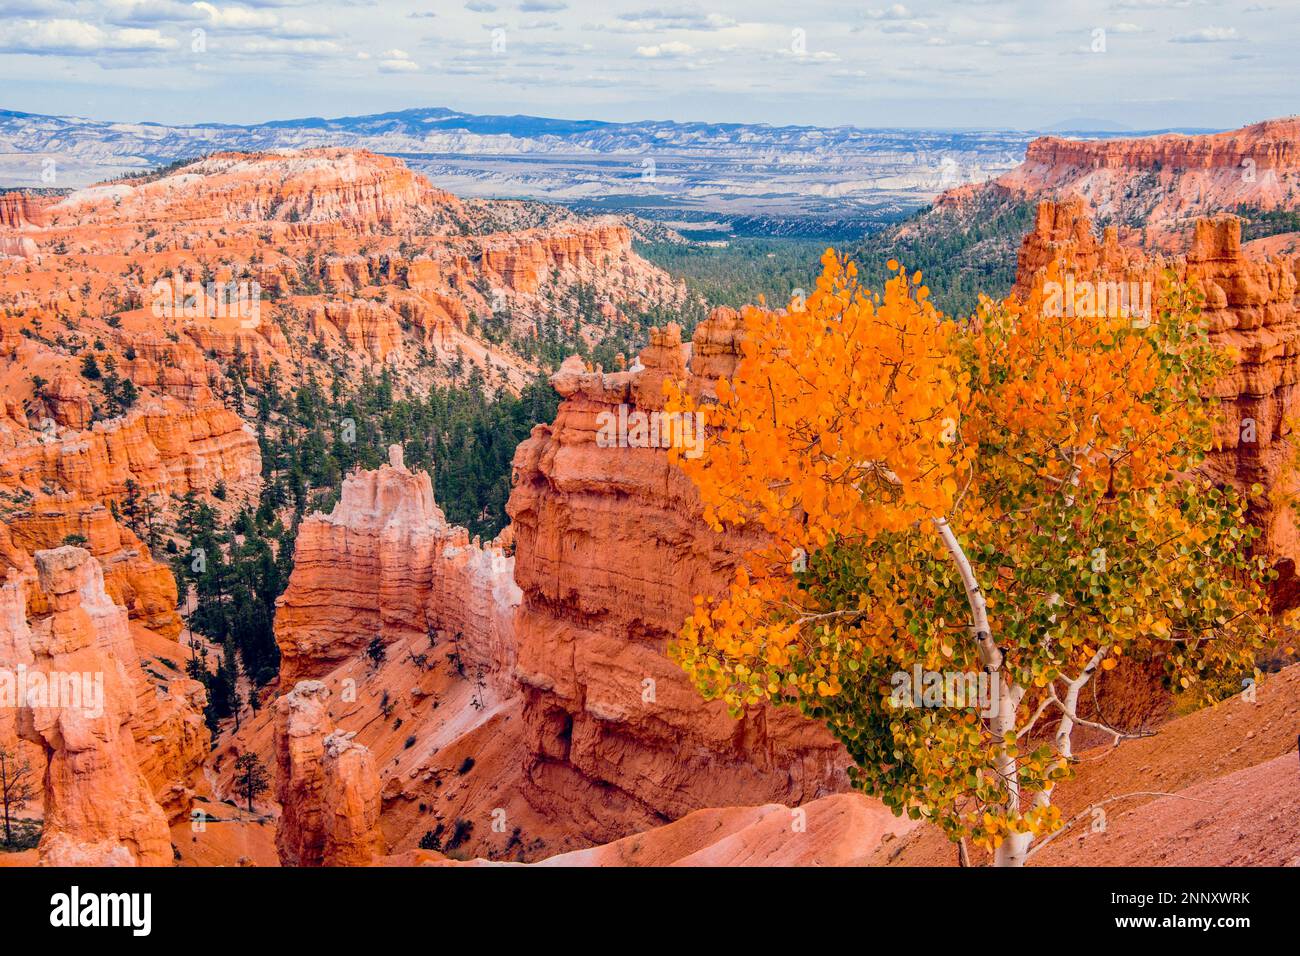 Paysage avec formations rocheuses hoodoo, Bryce Canyon, Utah, États-Unis Banque D'Images